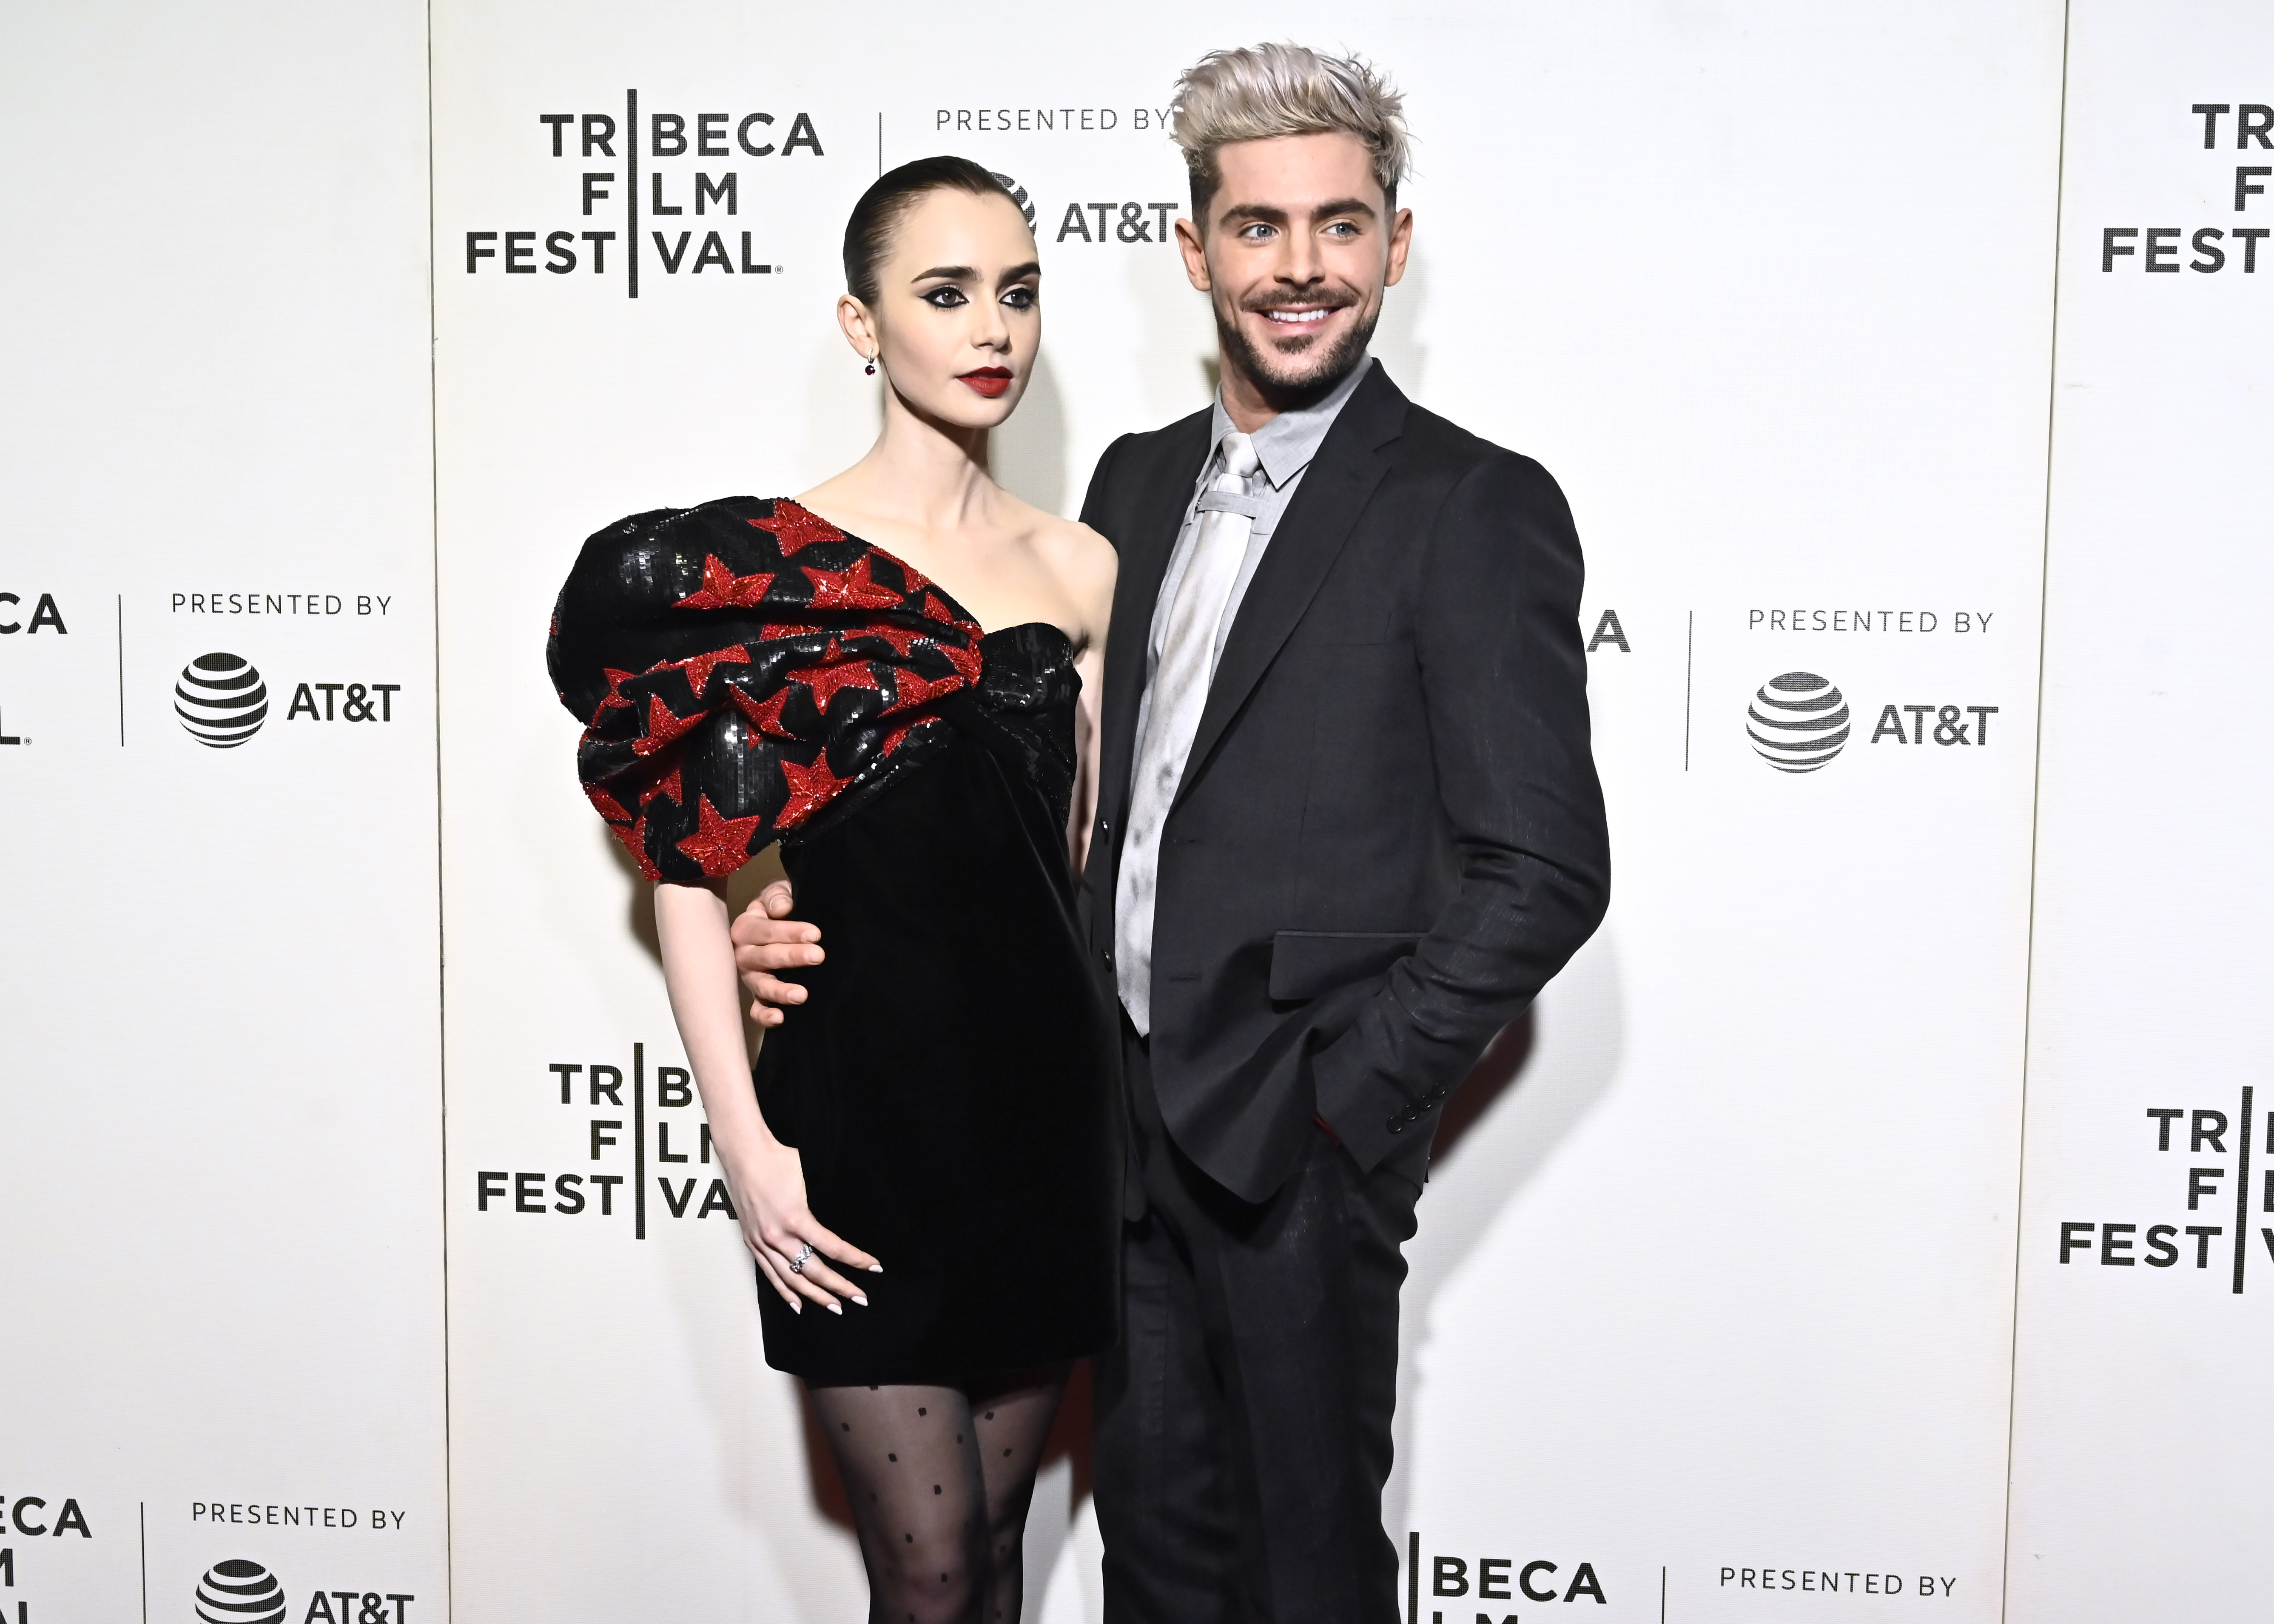 Lily Collins and Zac Efron attend Netflix's "Extremely Wicked, Shockingly Evil and Vile" premiere at BMCC Tribeca Performing Arts Center. on May 02, 2019. in New York City. | Source: Getty Images